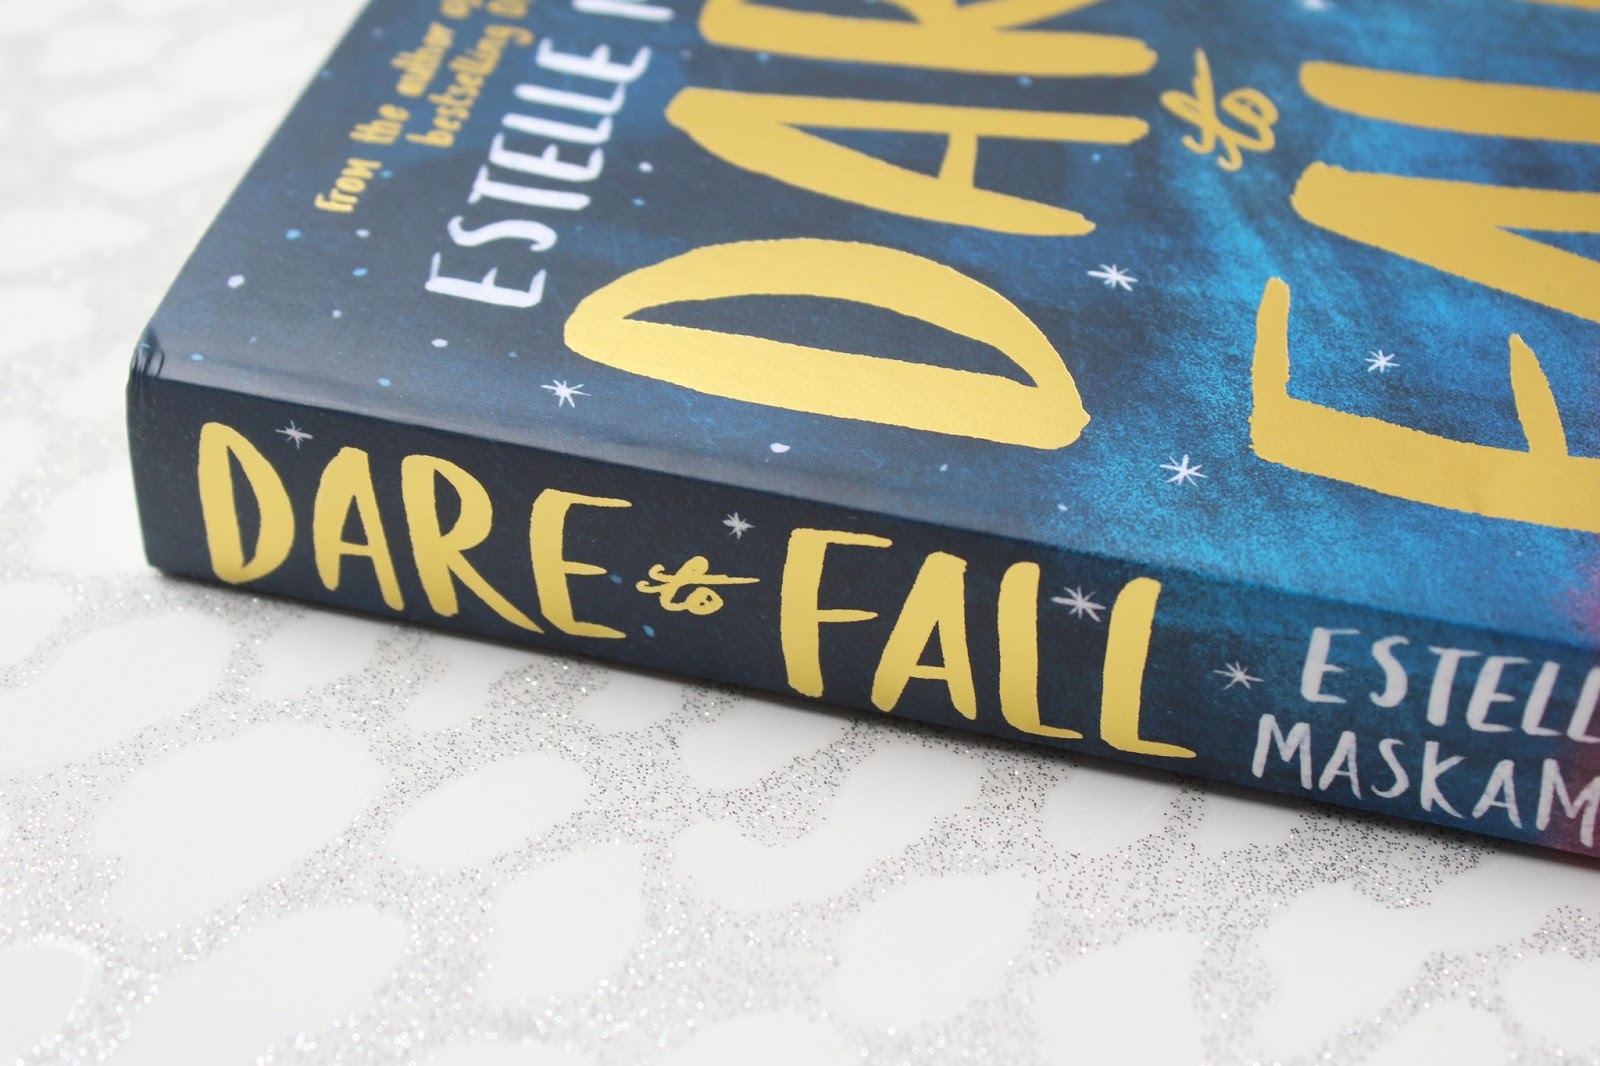 Dare to Fall by Estelle Maskame 